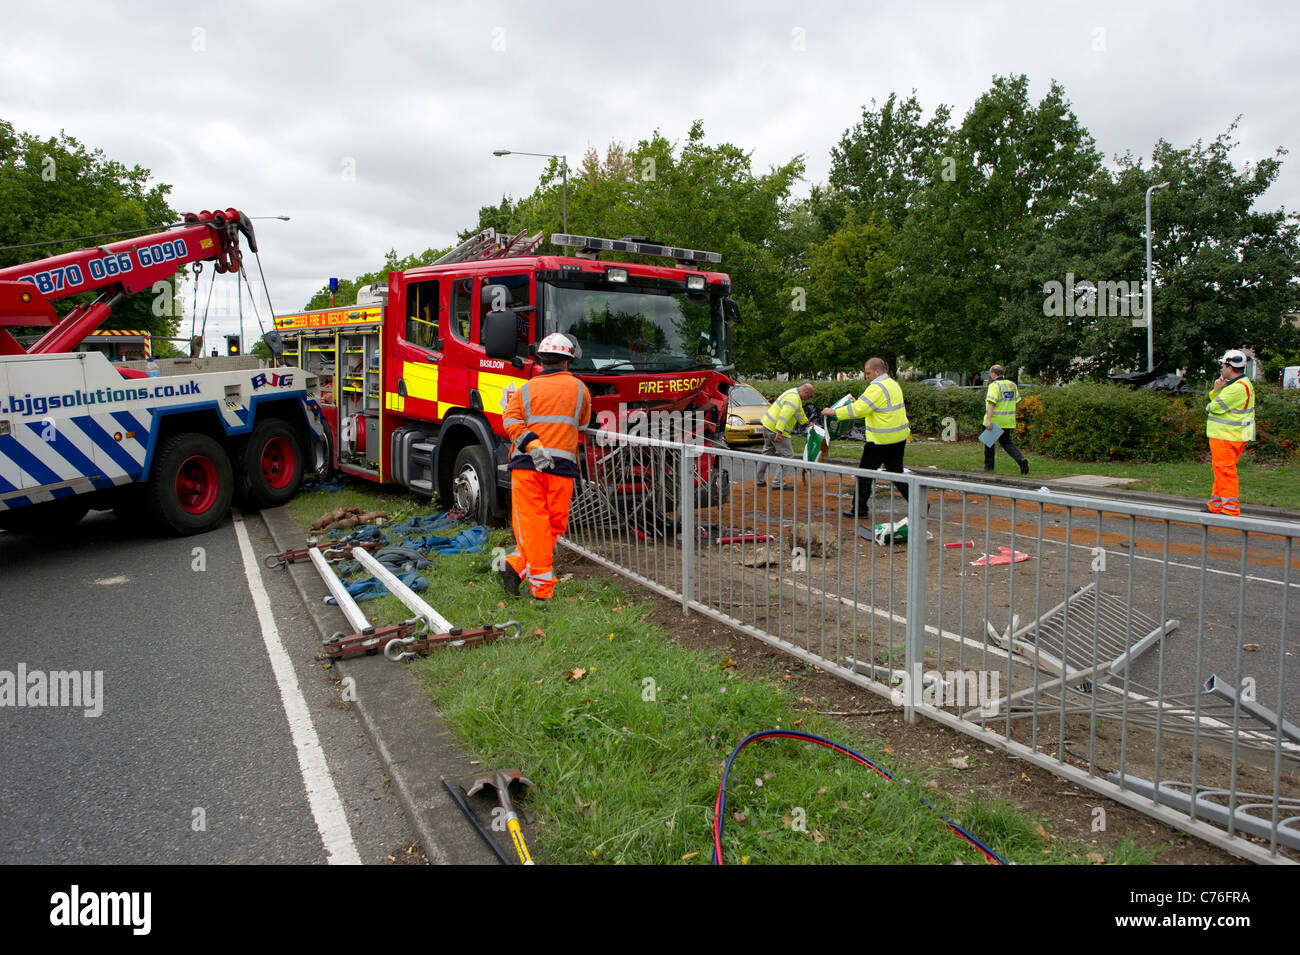 Police and recovery workers preparing to clear the scene of a serious road accident involving a fire engine and a car. Stock Photo